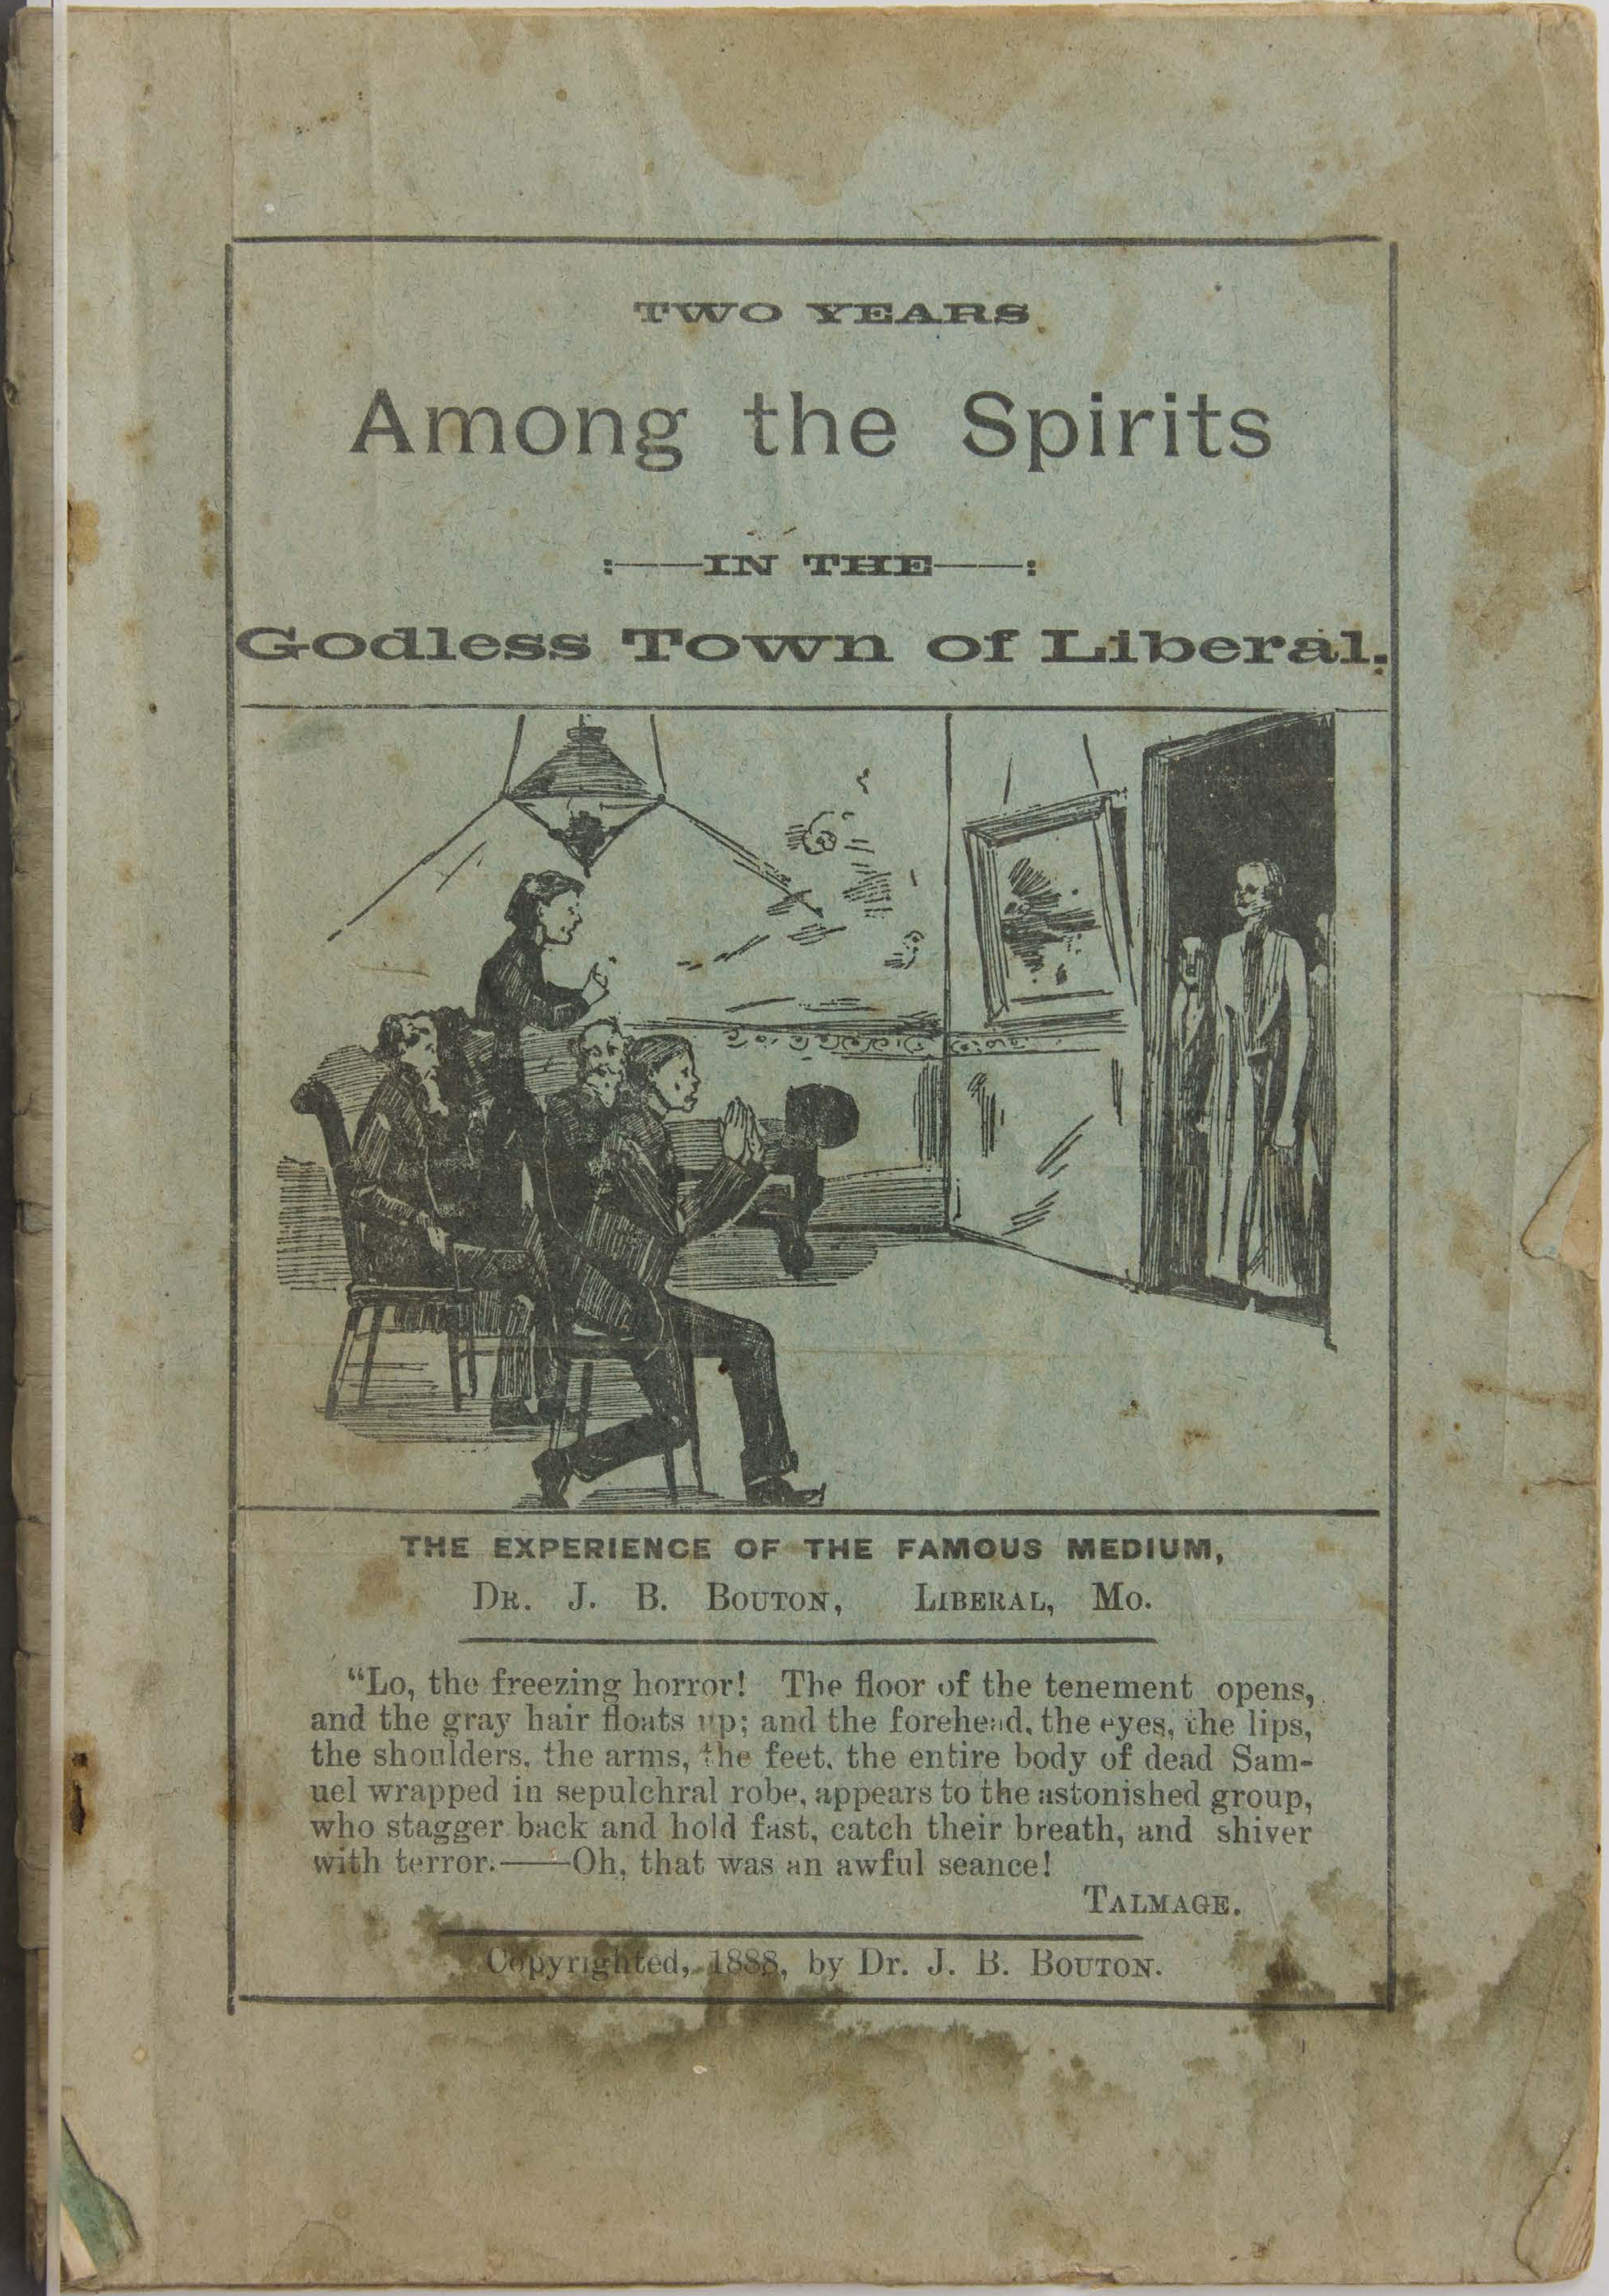 Two Years Among the Spirits in the Godless Town of Liberal: The Experience of the Famous Medium, Dr. J. B. Bouton, Liberal, Mo.